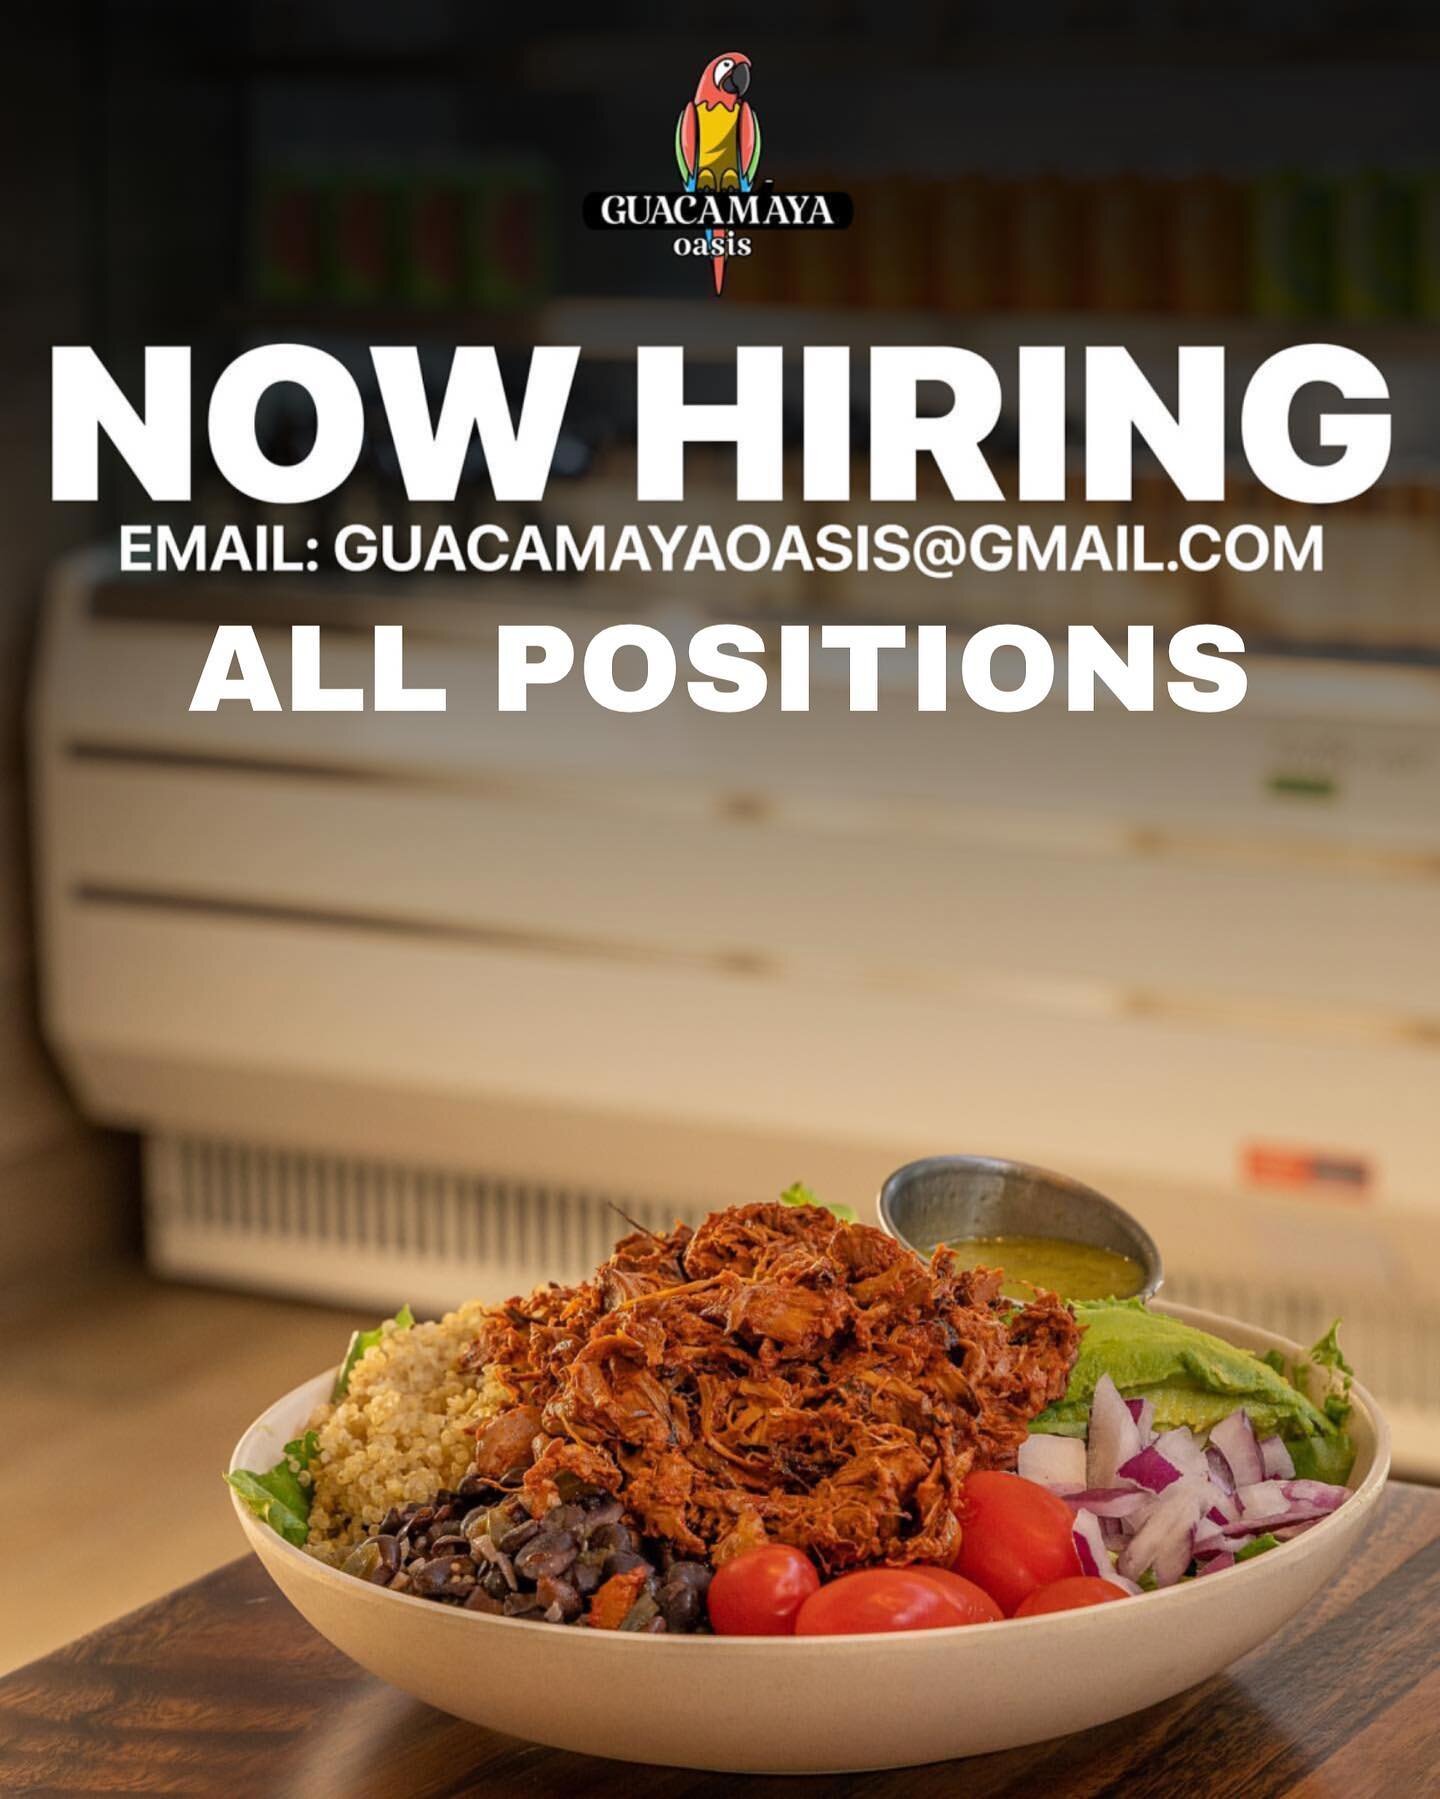 Join our team!

If interested, please send us an email with your resume at guacamayaoasis@gmail.com 

Prior restaurant experience is required, thank you! 🌱